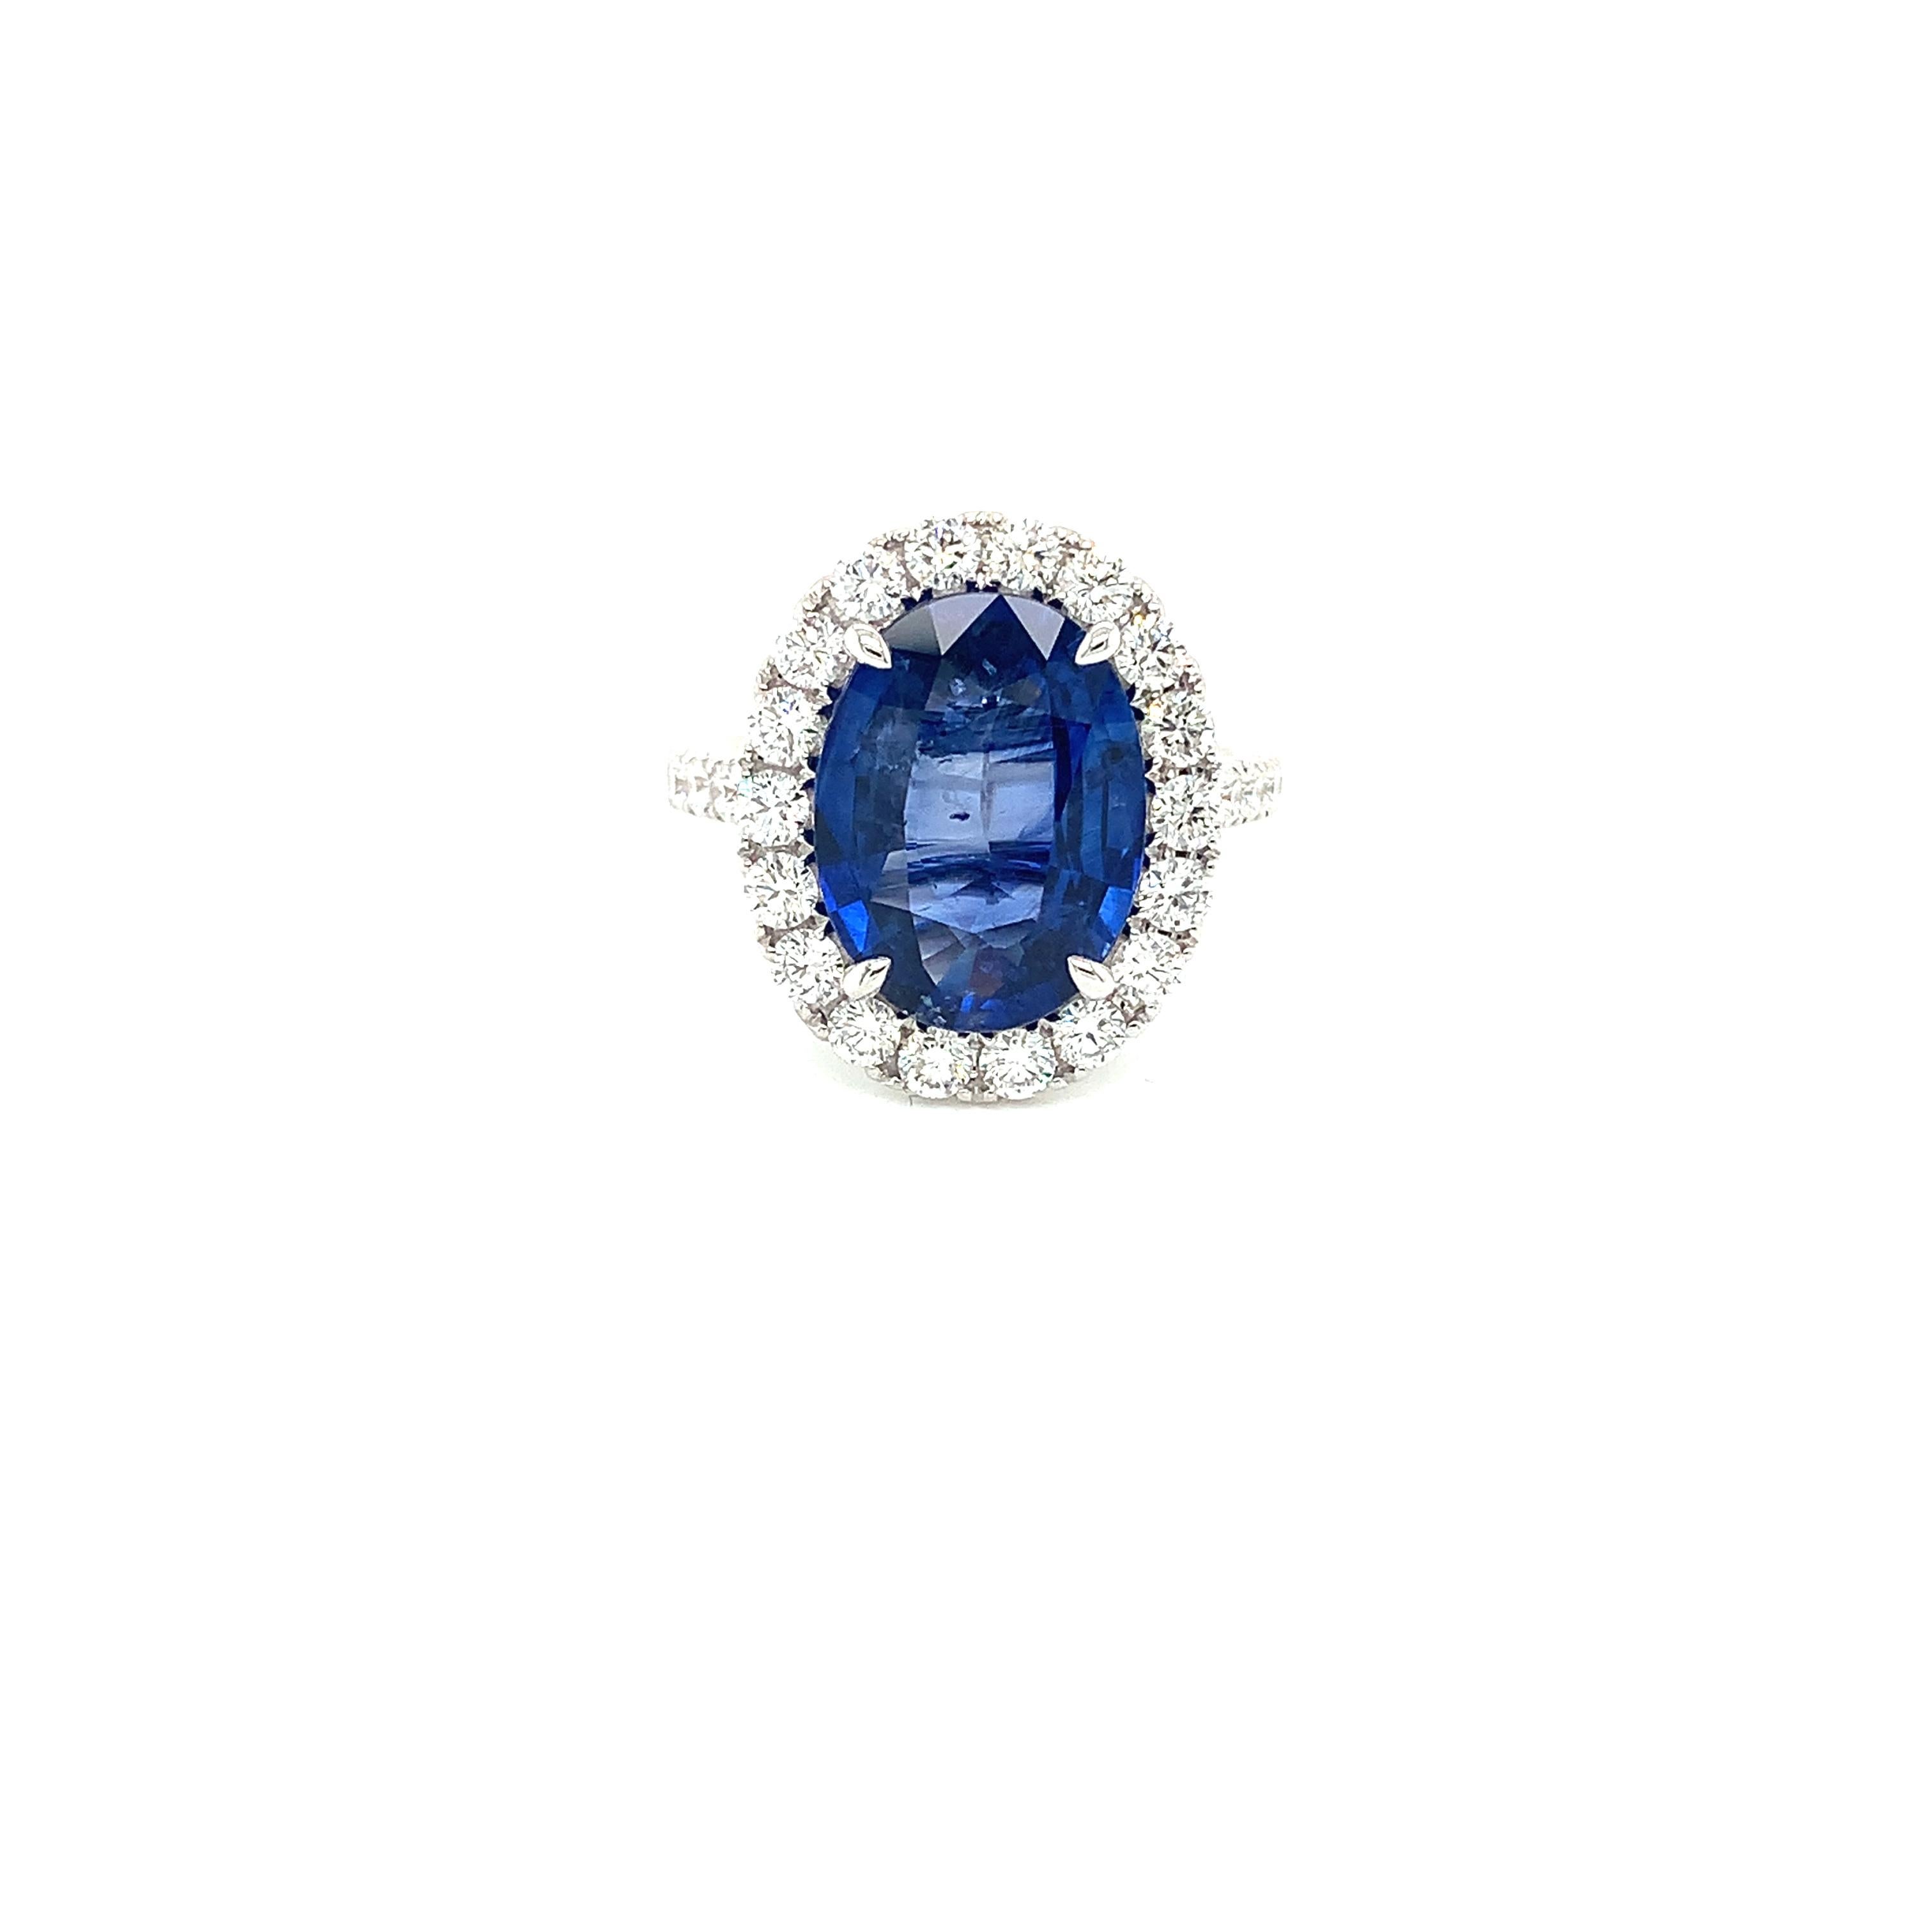 Oval Ceylon Sapphire weighing 5.44 carats
Measuring (13.31x10.05x4.74) mm
Diamonds weighing 1.15 carats
Set in 18k white gold ring